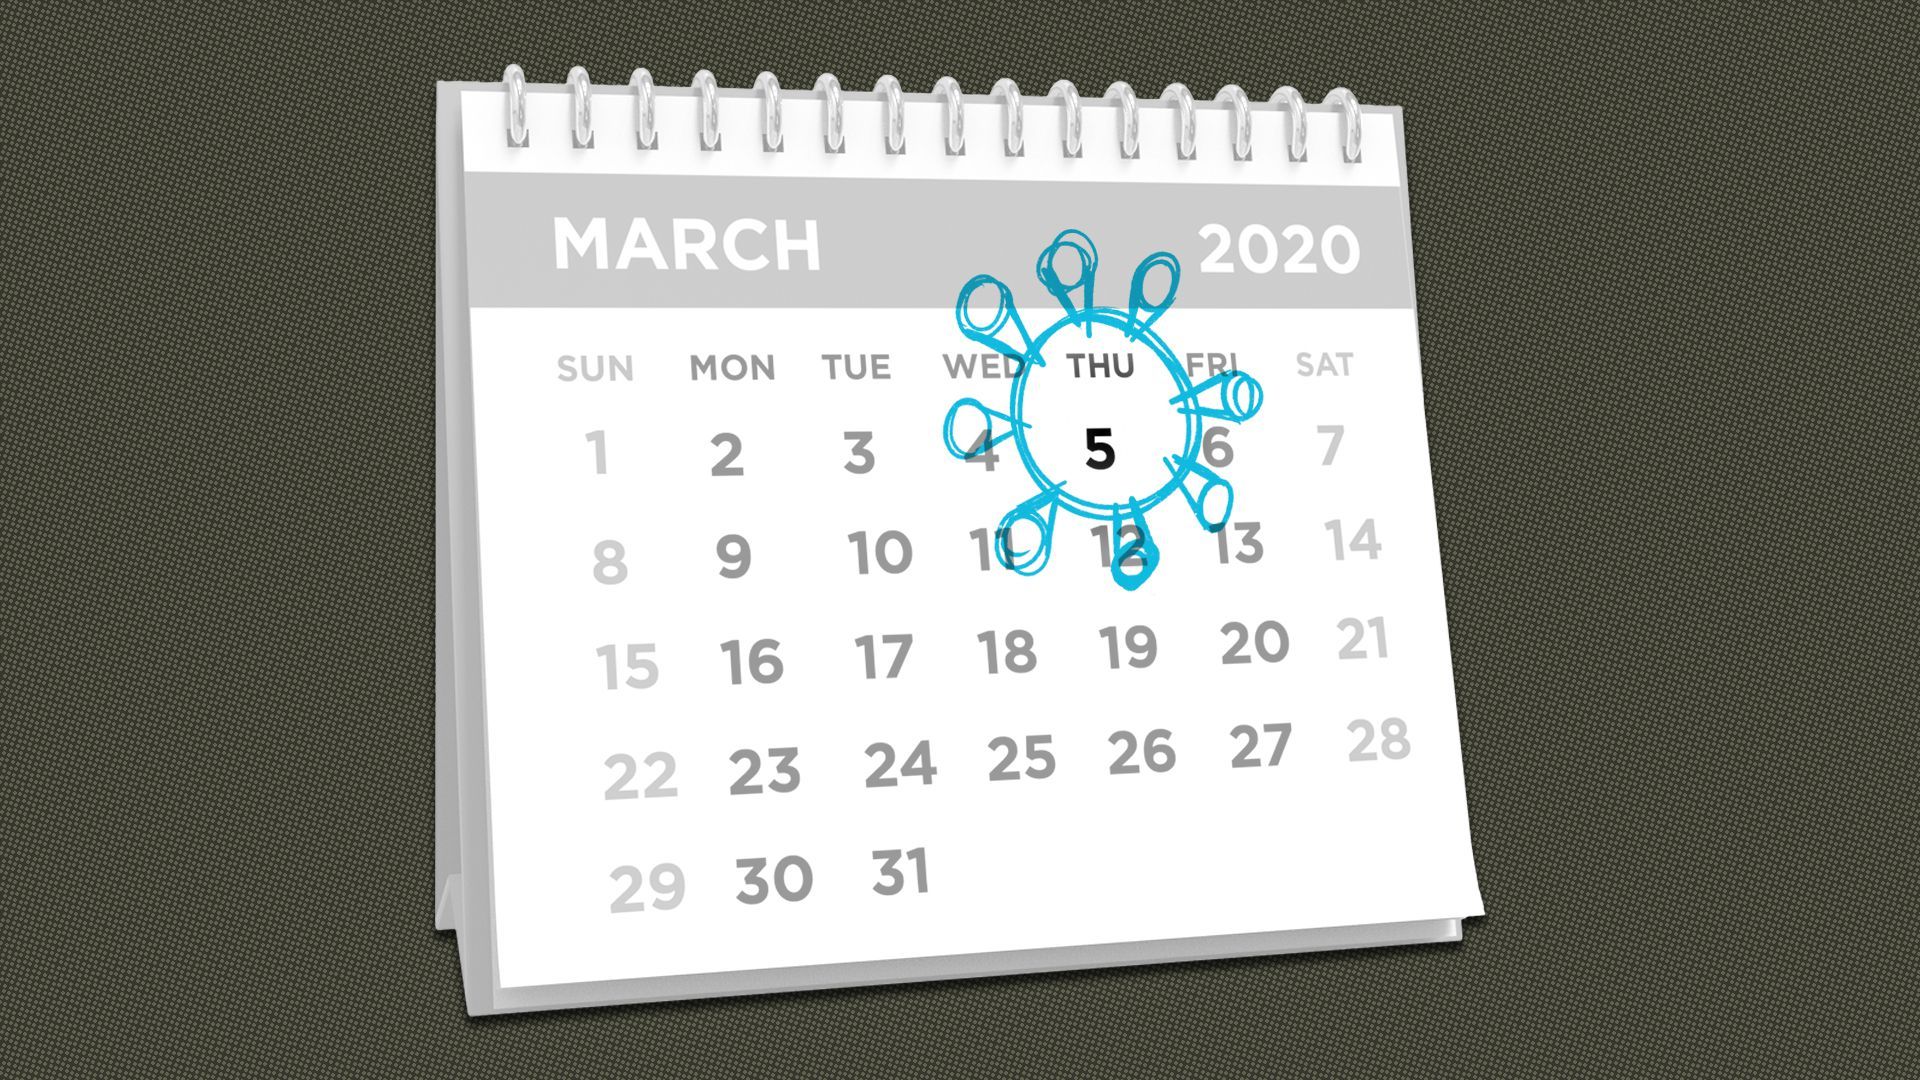 Illustration of a calendar with March 5, 2020, circled with the shape of coronavirus.